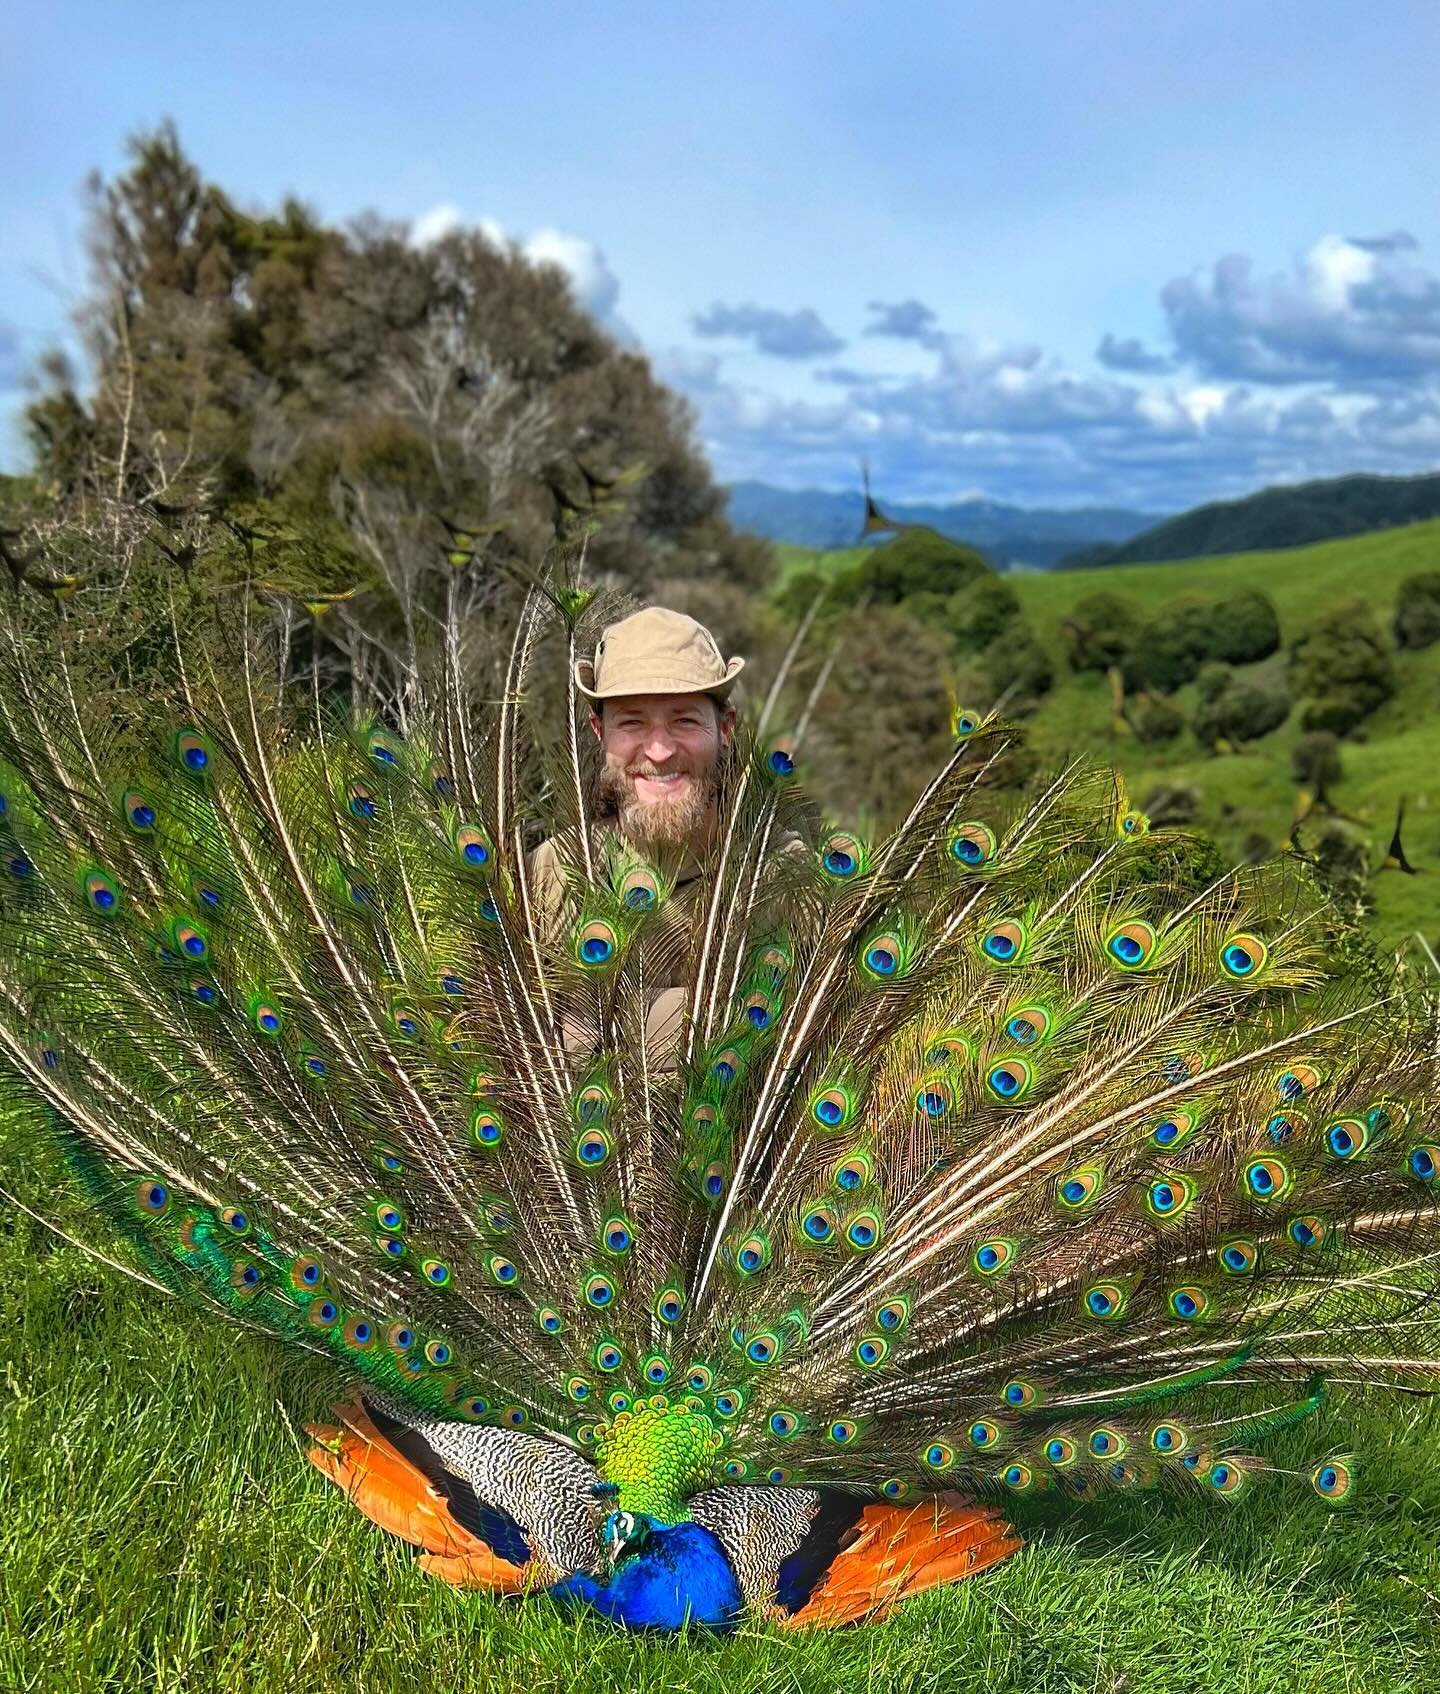 Peacocks are a protected species in India where they&rsquo;re both endemic and the National Bird. 

But farmers are eager to get them off their land on the North Island of New Zealand where they&rsquo;re an introduced, deleterious non-native. Believe